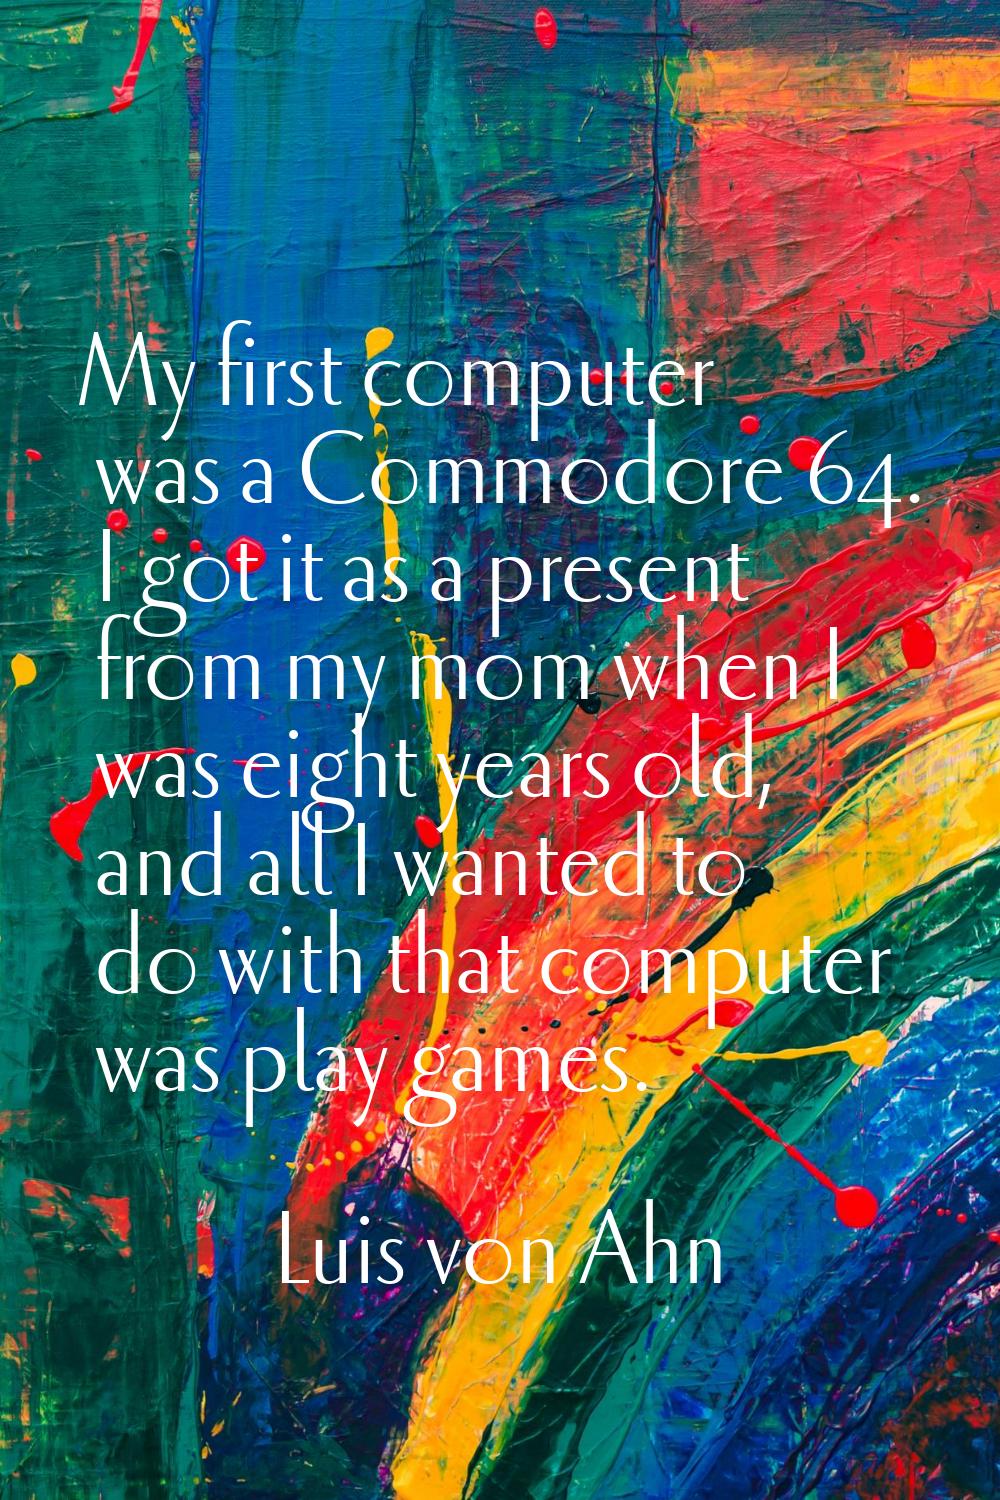 My first computer was a Commodore 64. I got it as a present from my mom when I was eight years old,